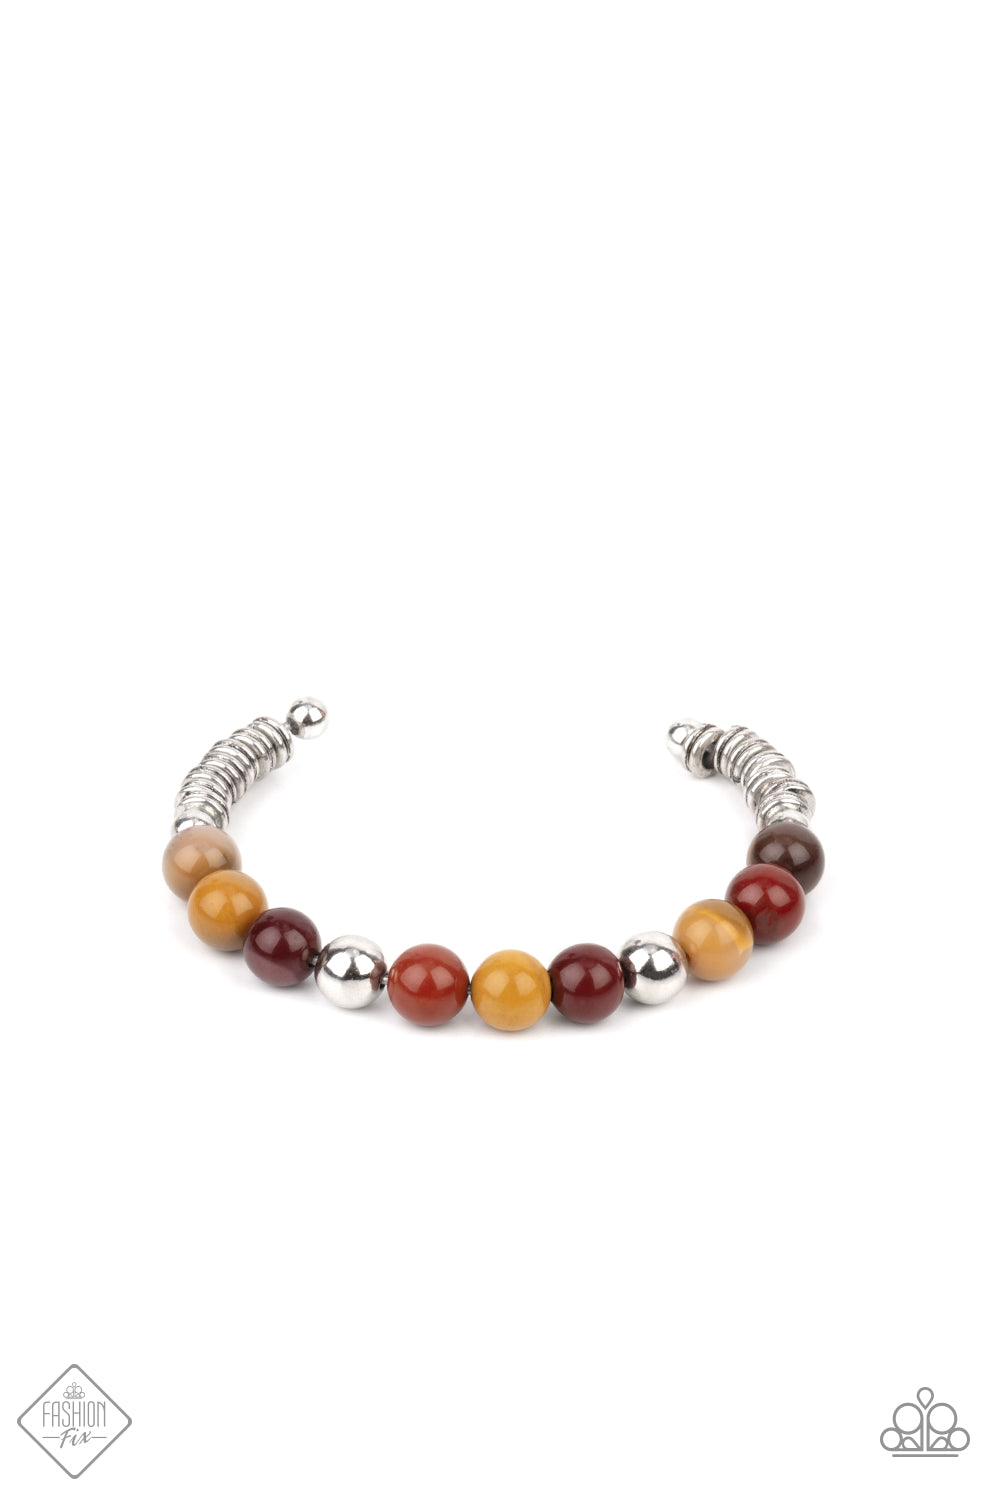 Accented with shiny silver beads, a collection of polished multicolored stone beads are fashioned into a wire cuff bracelet